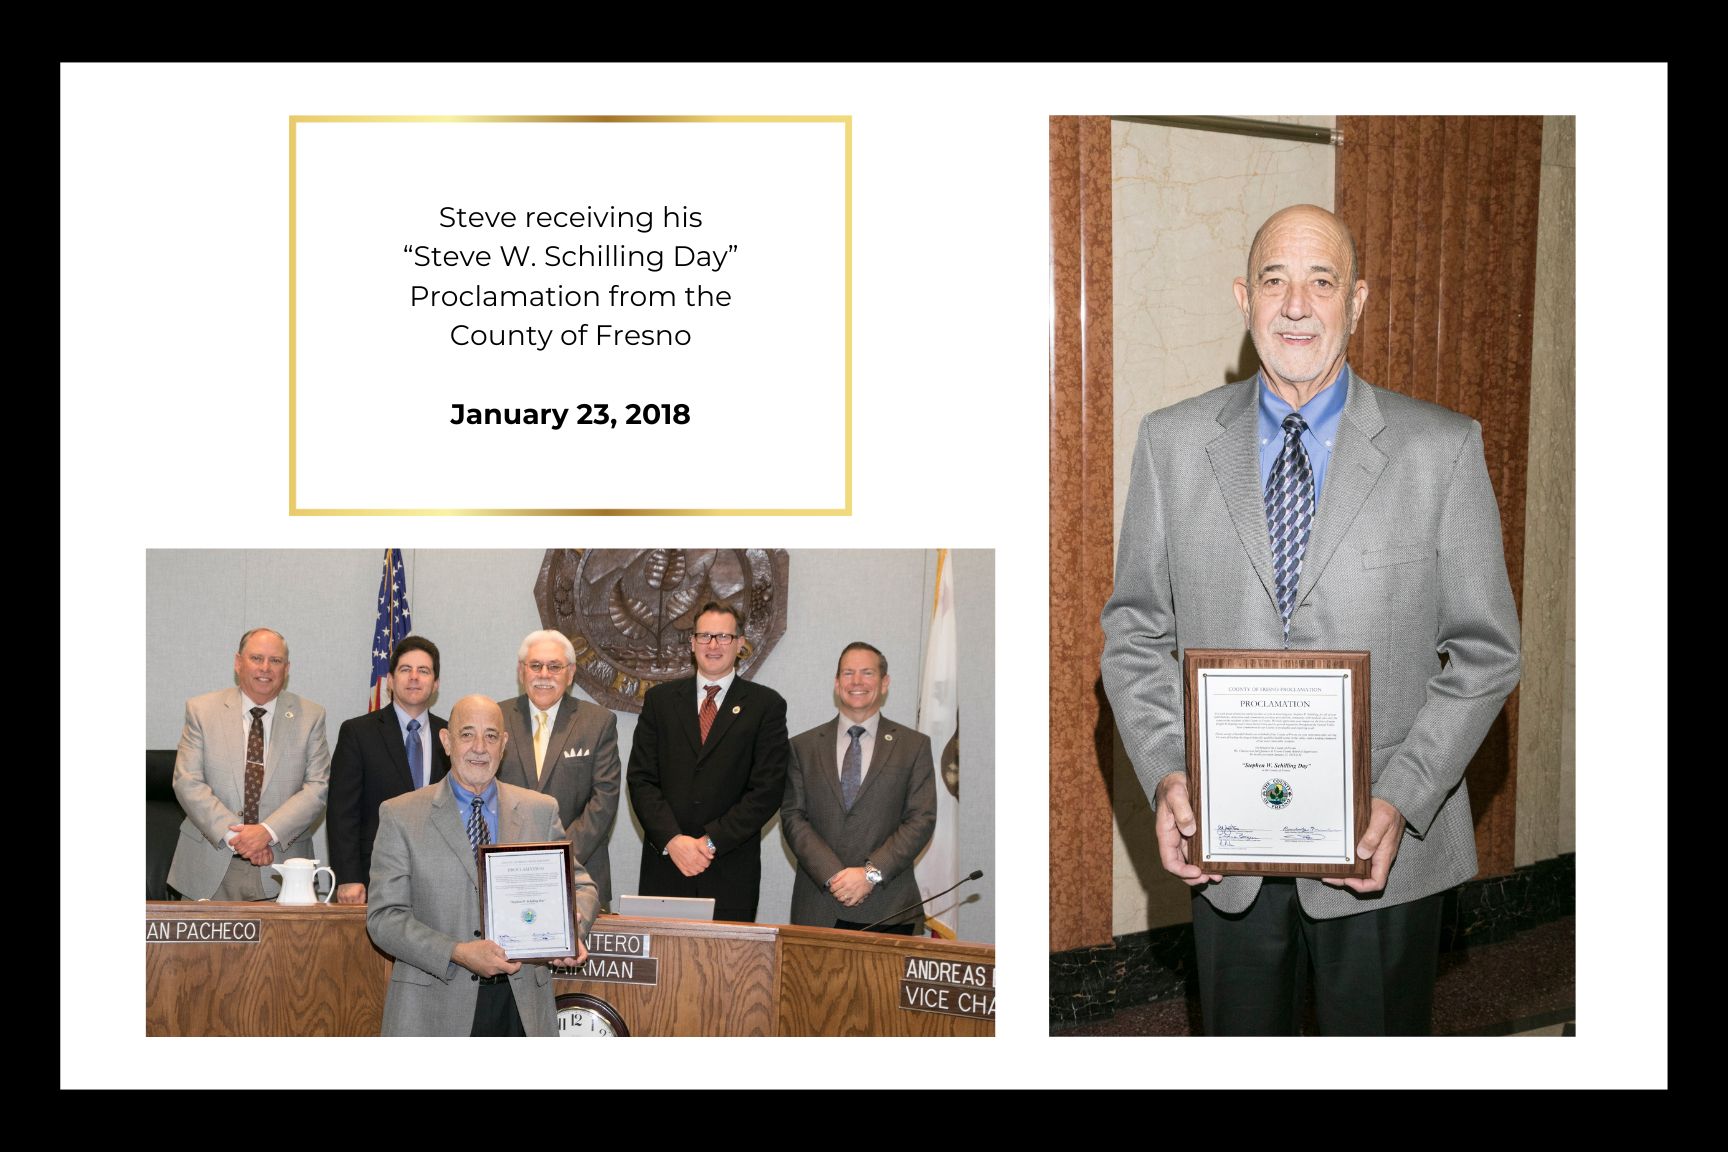 Steve receiving his “Steve W. Schilling Day” Proclamation from the County of Fresno  January 23, 2018.